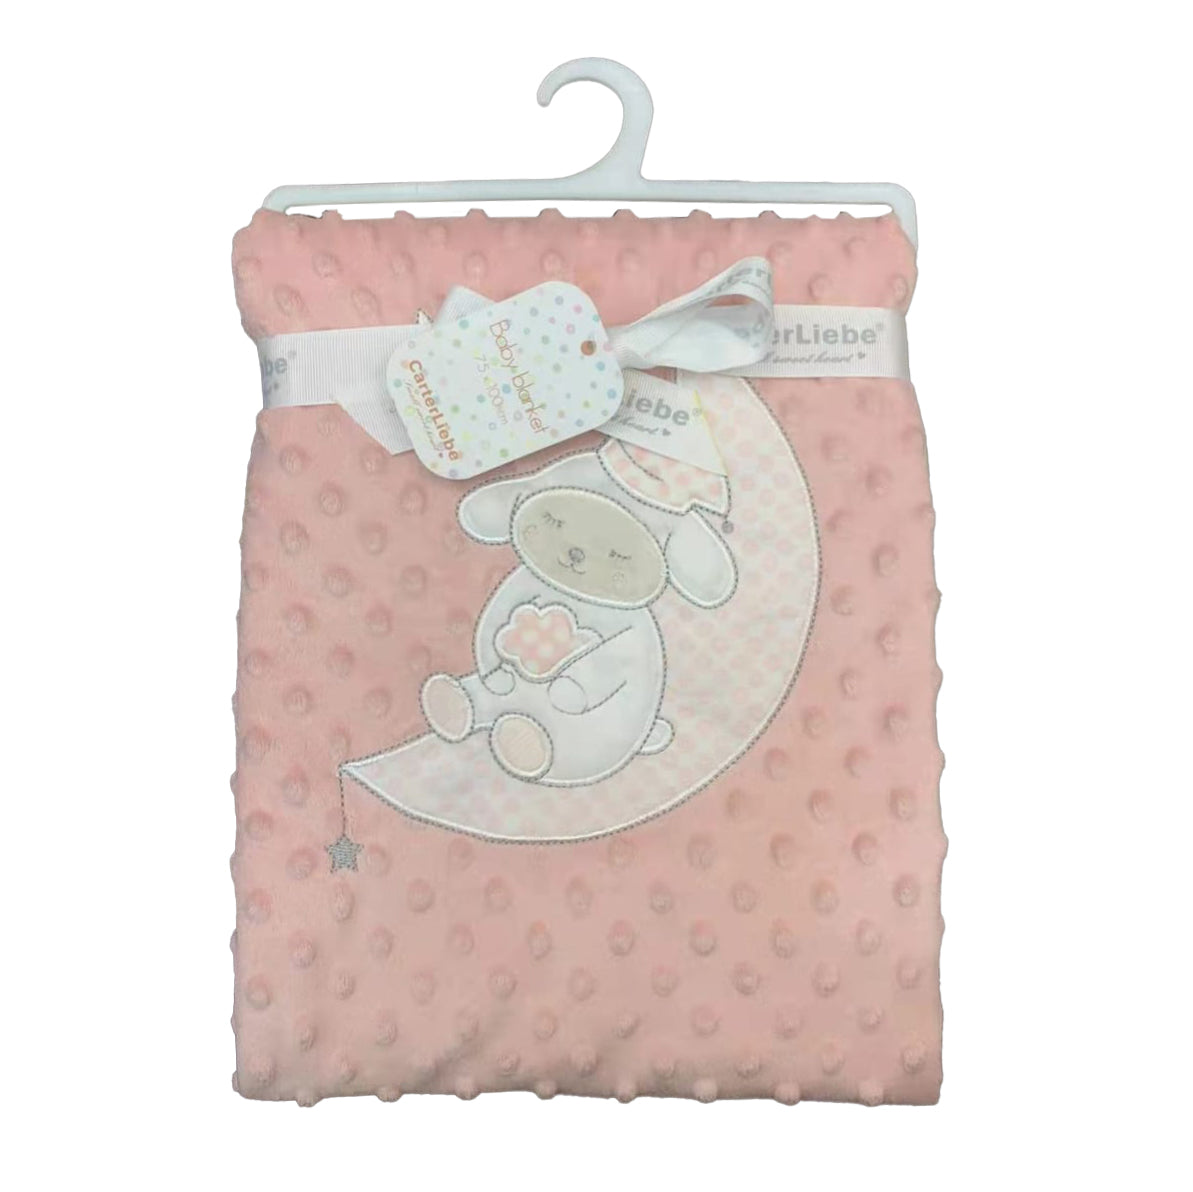 Carterliebe Your Star Is Born Soft Bubble Blanket